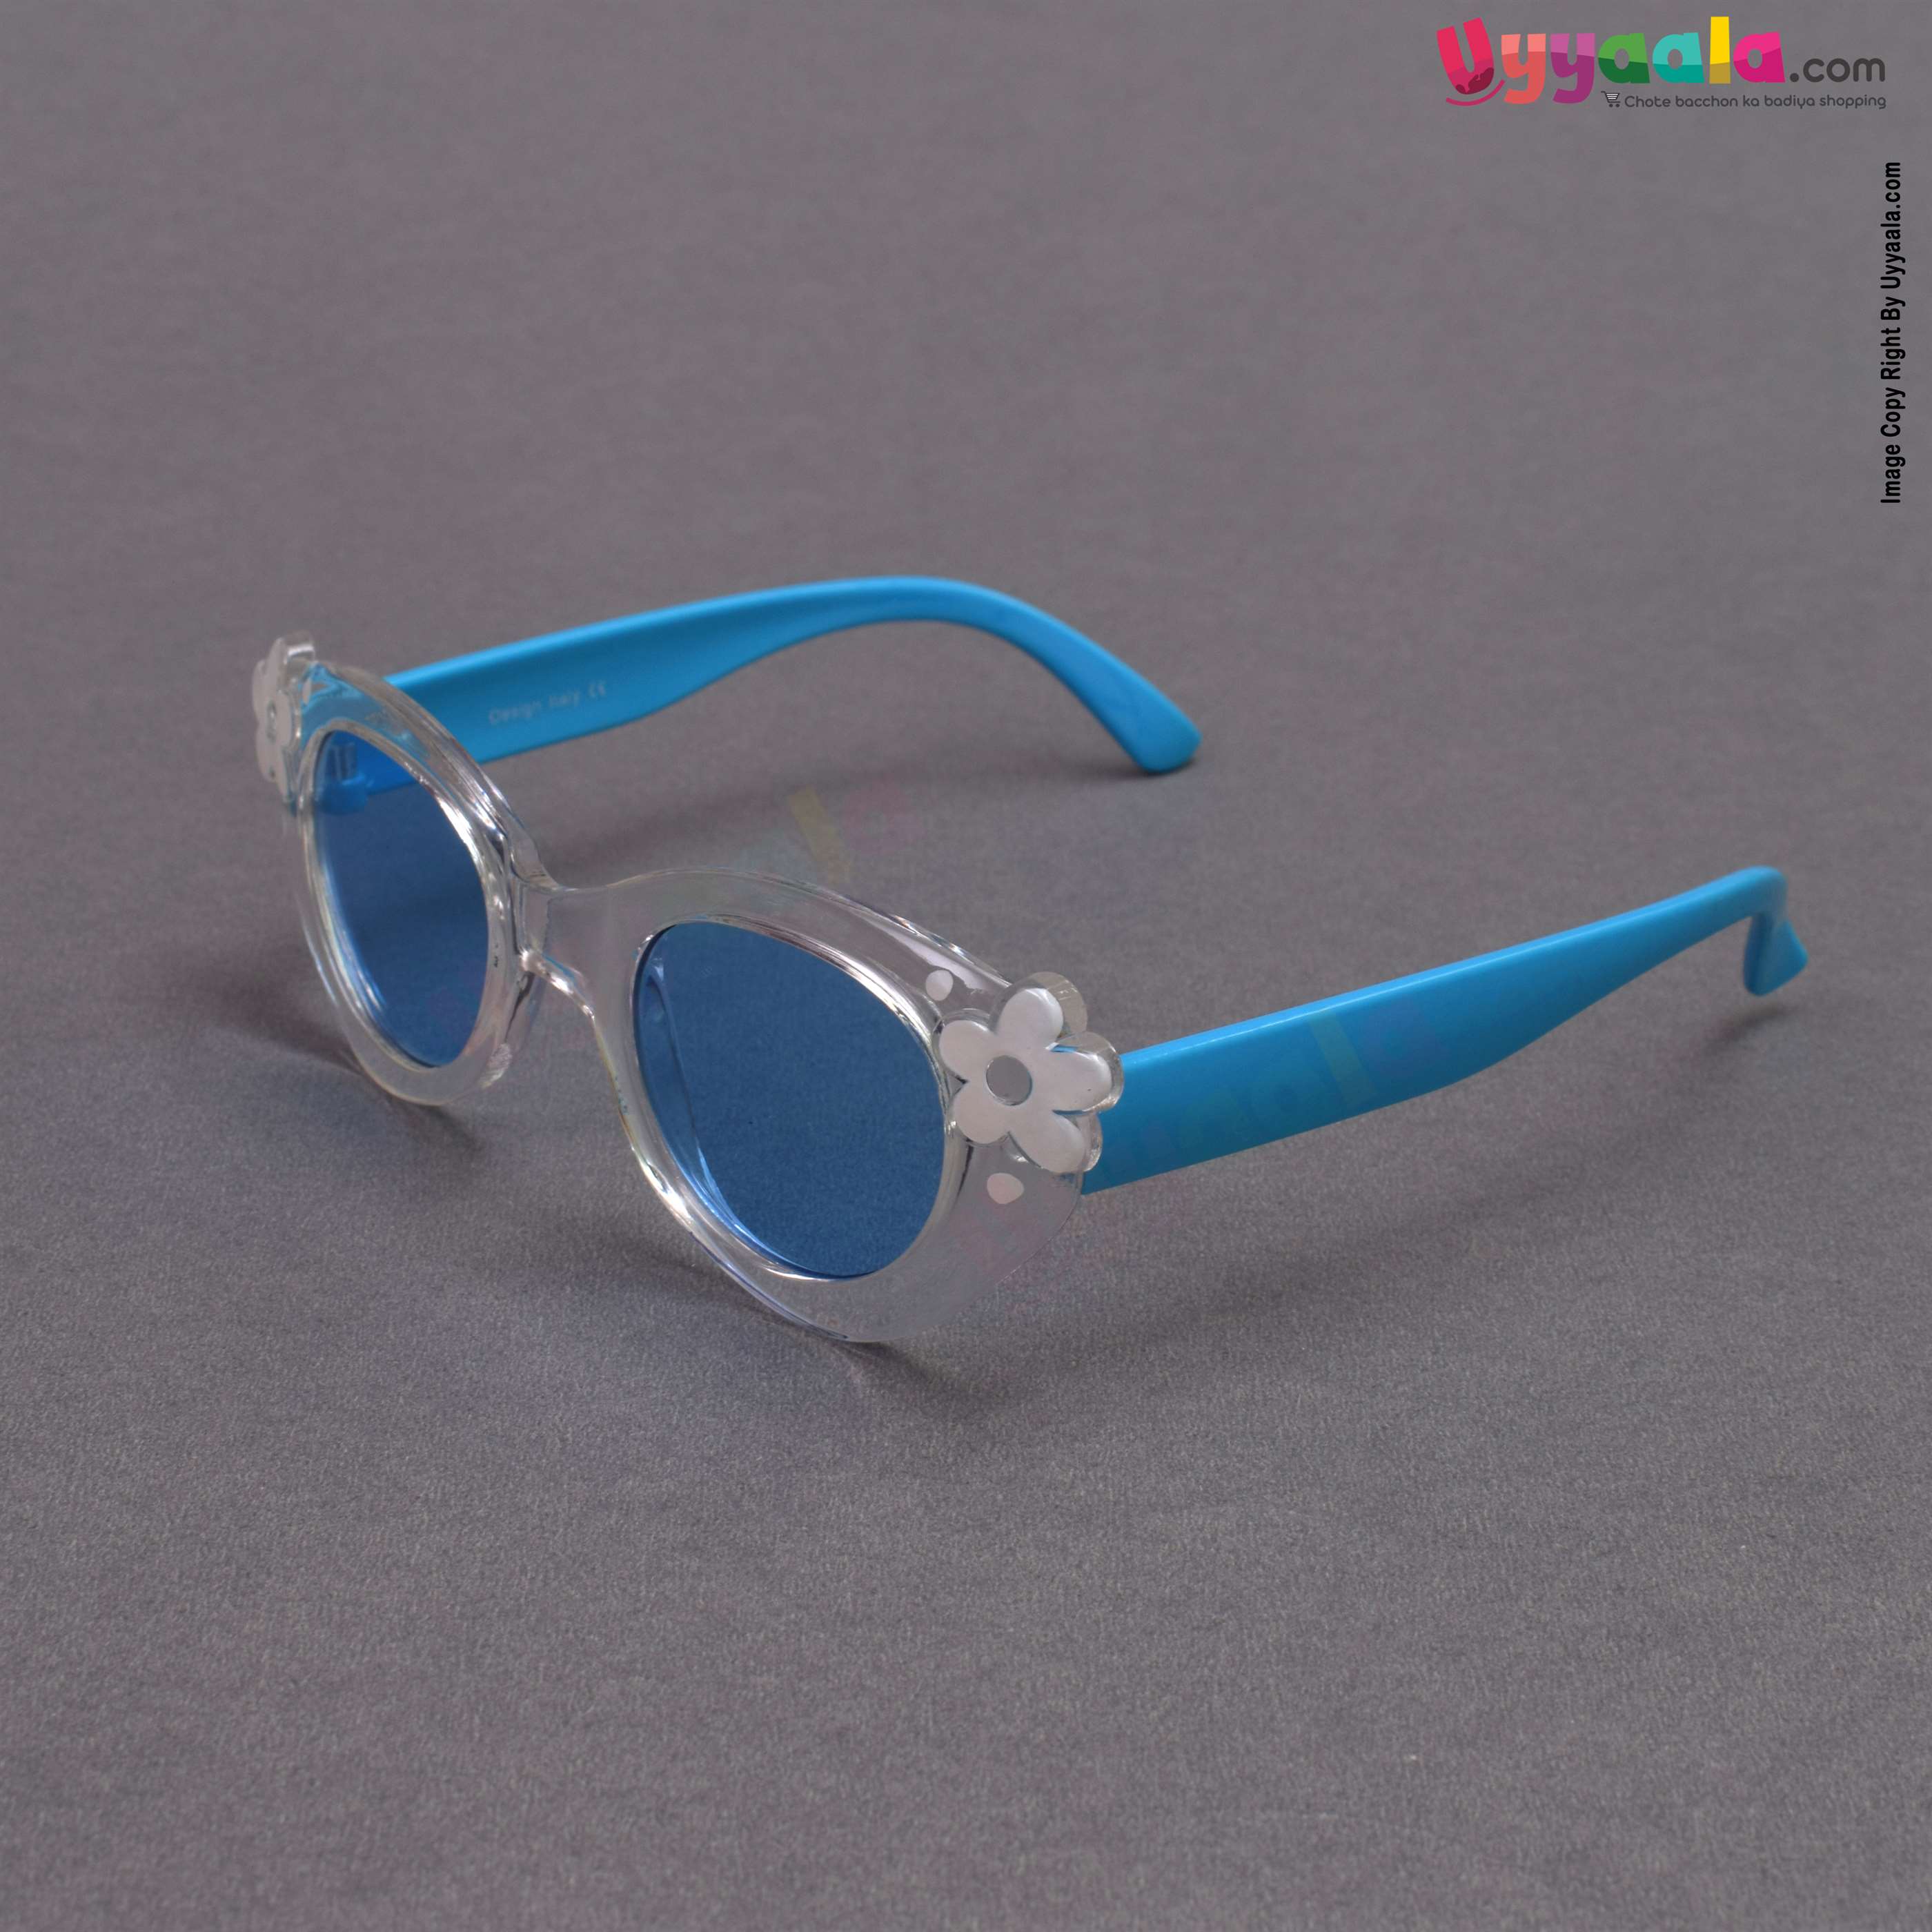 Stylish cat eye shaped blue shade sunglasses for kids - sky blue with flower patch, 1 - 10 years